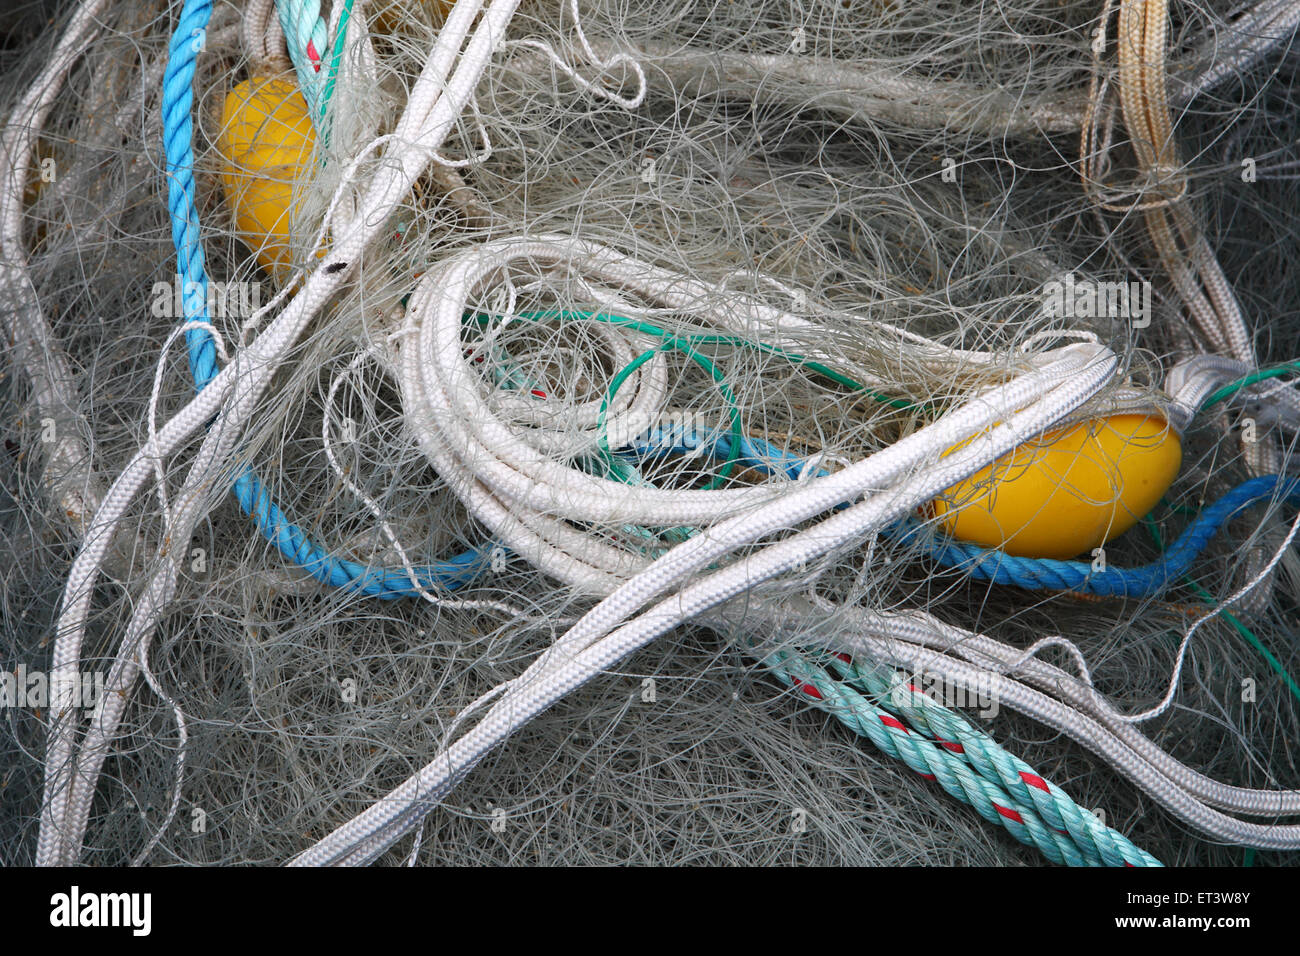 https://c8.alamy.com/comp/ET3W8Y/abstract-patterns-and-shapes-in-a-fishing-harbour-ET3W8Y.jpg